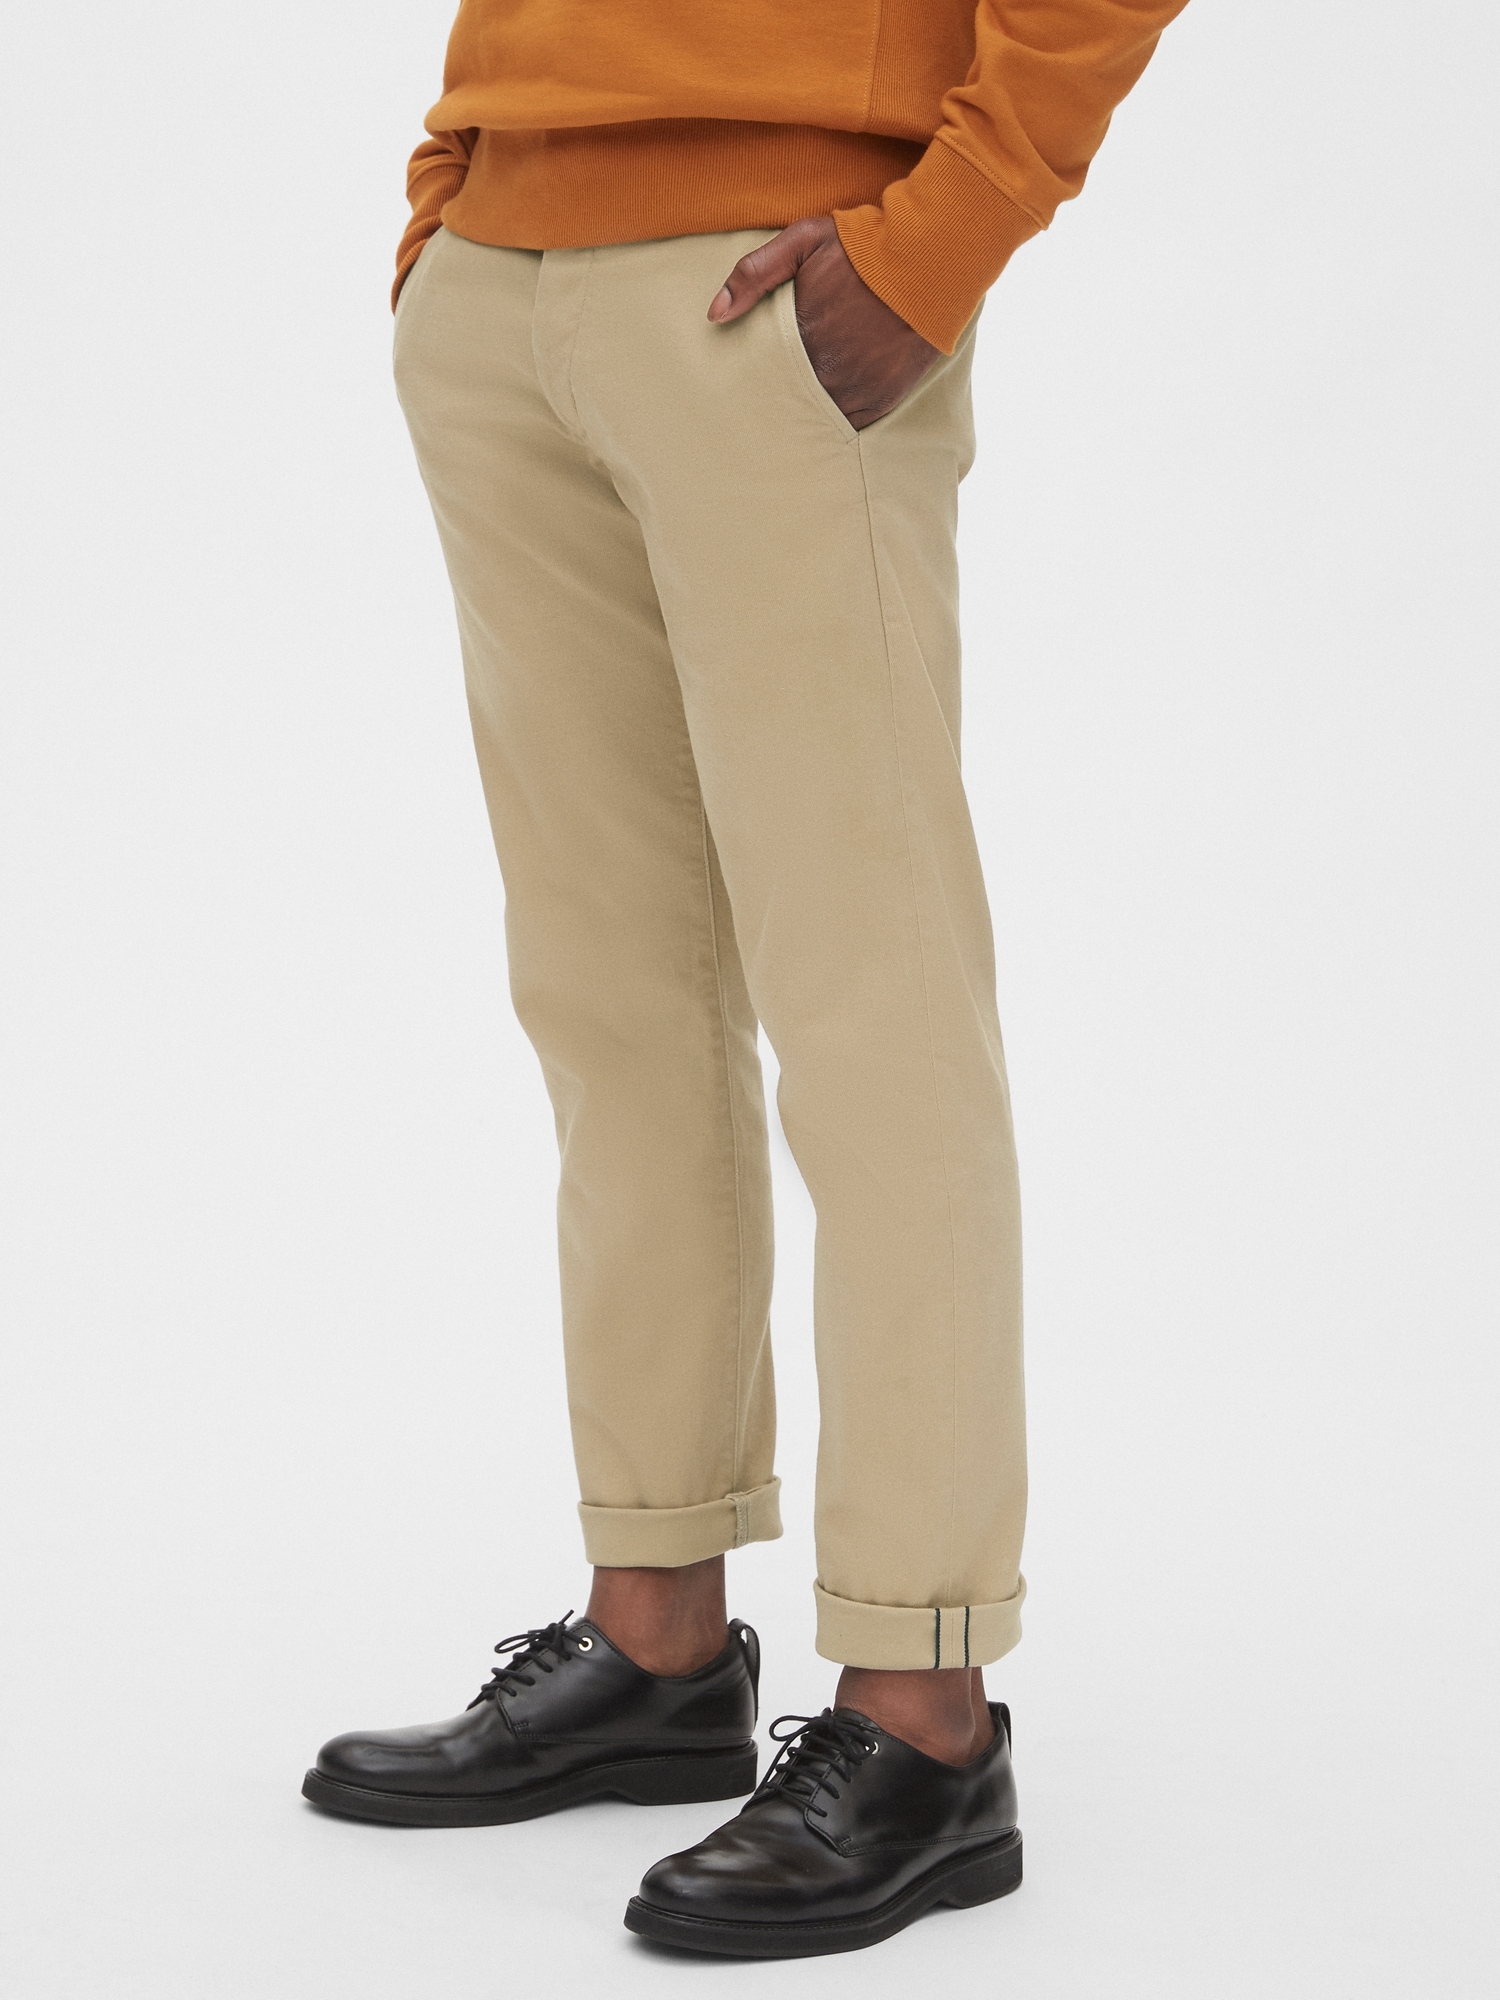 Bought my first pair of mens pants today (gap modern khakis straight fit  with flex). Open to styling suggestions : r/lesbianfashionadvice